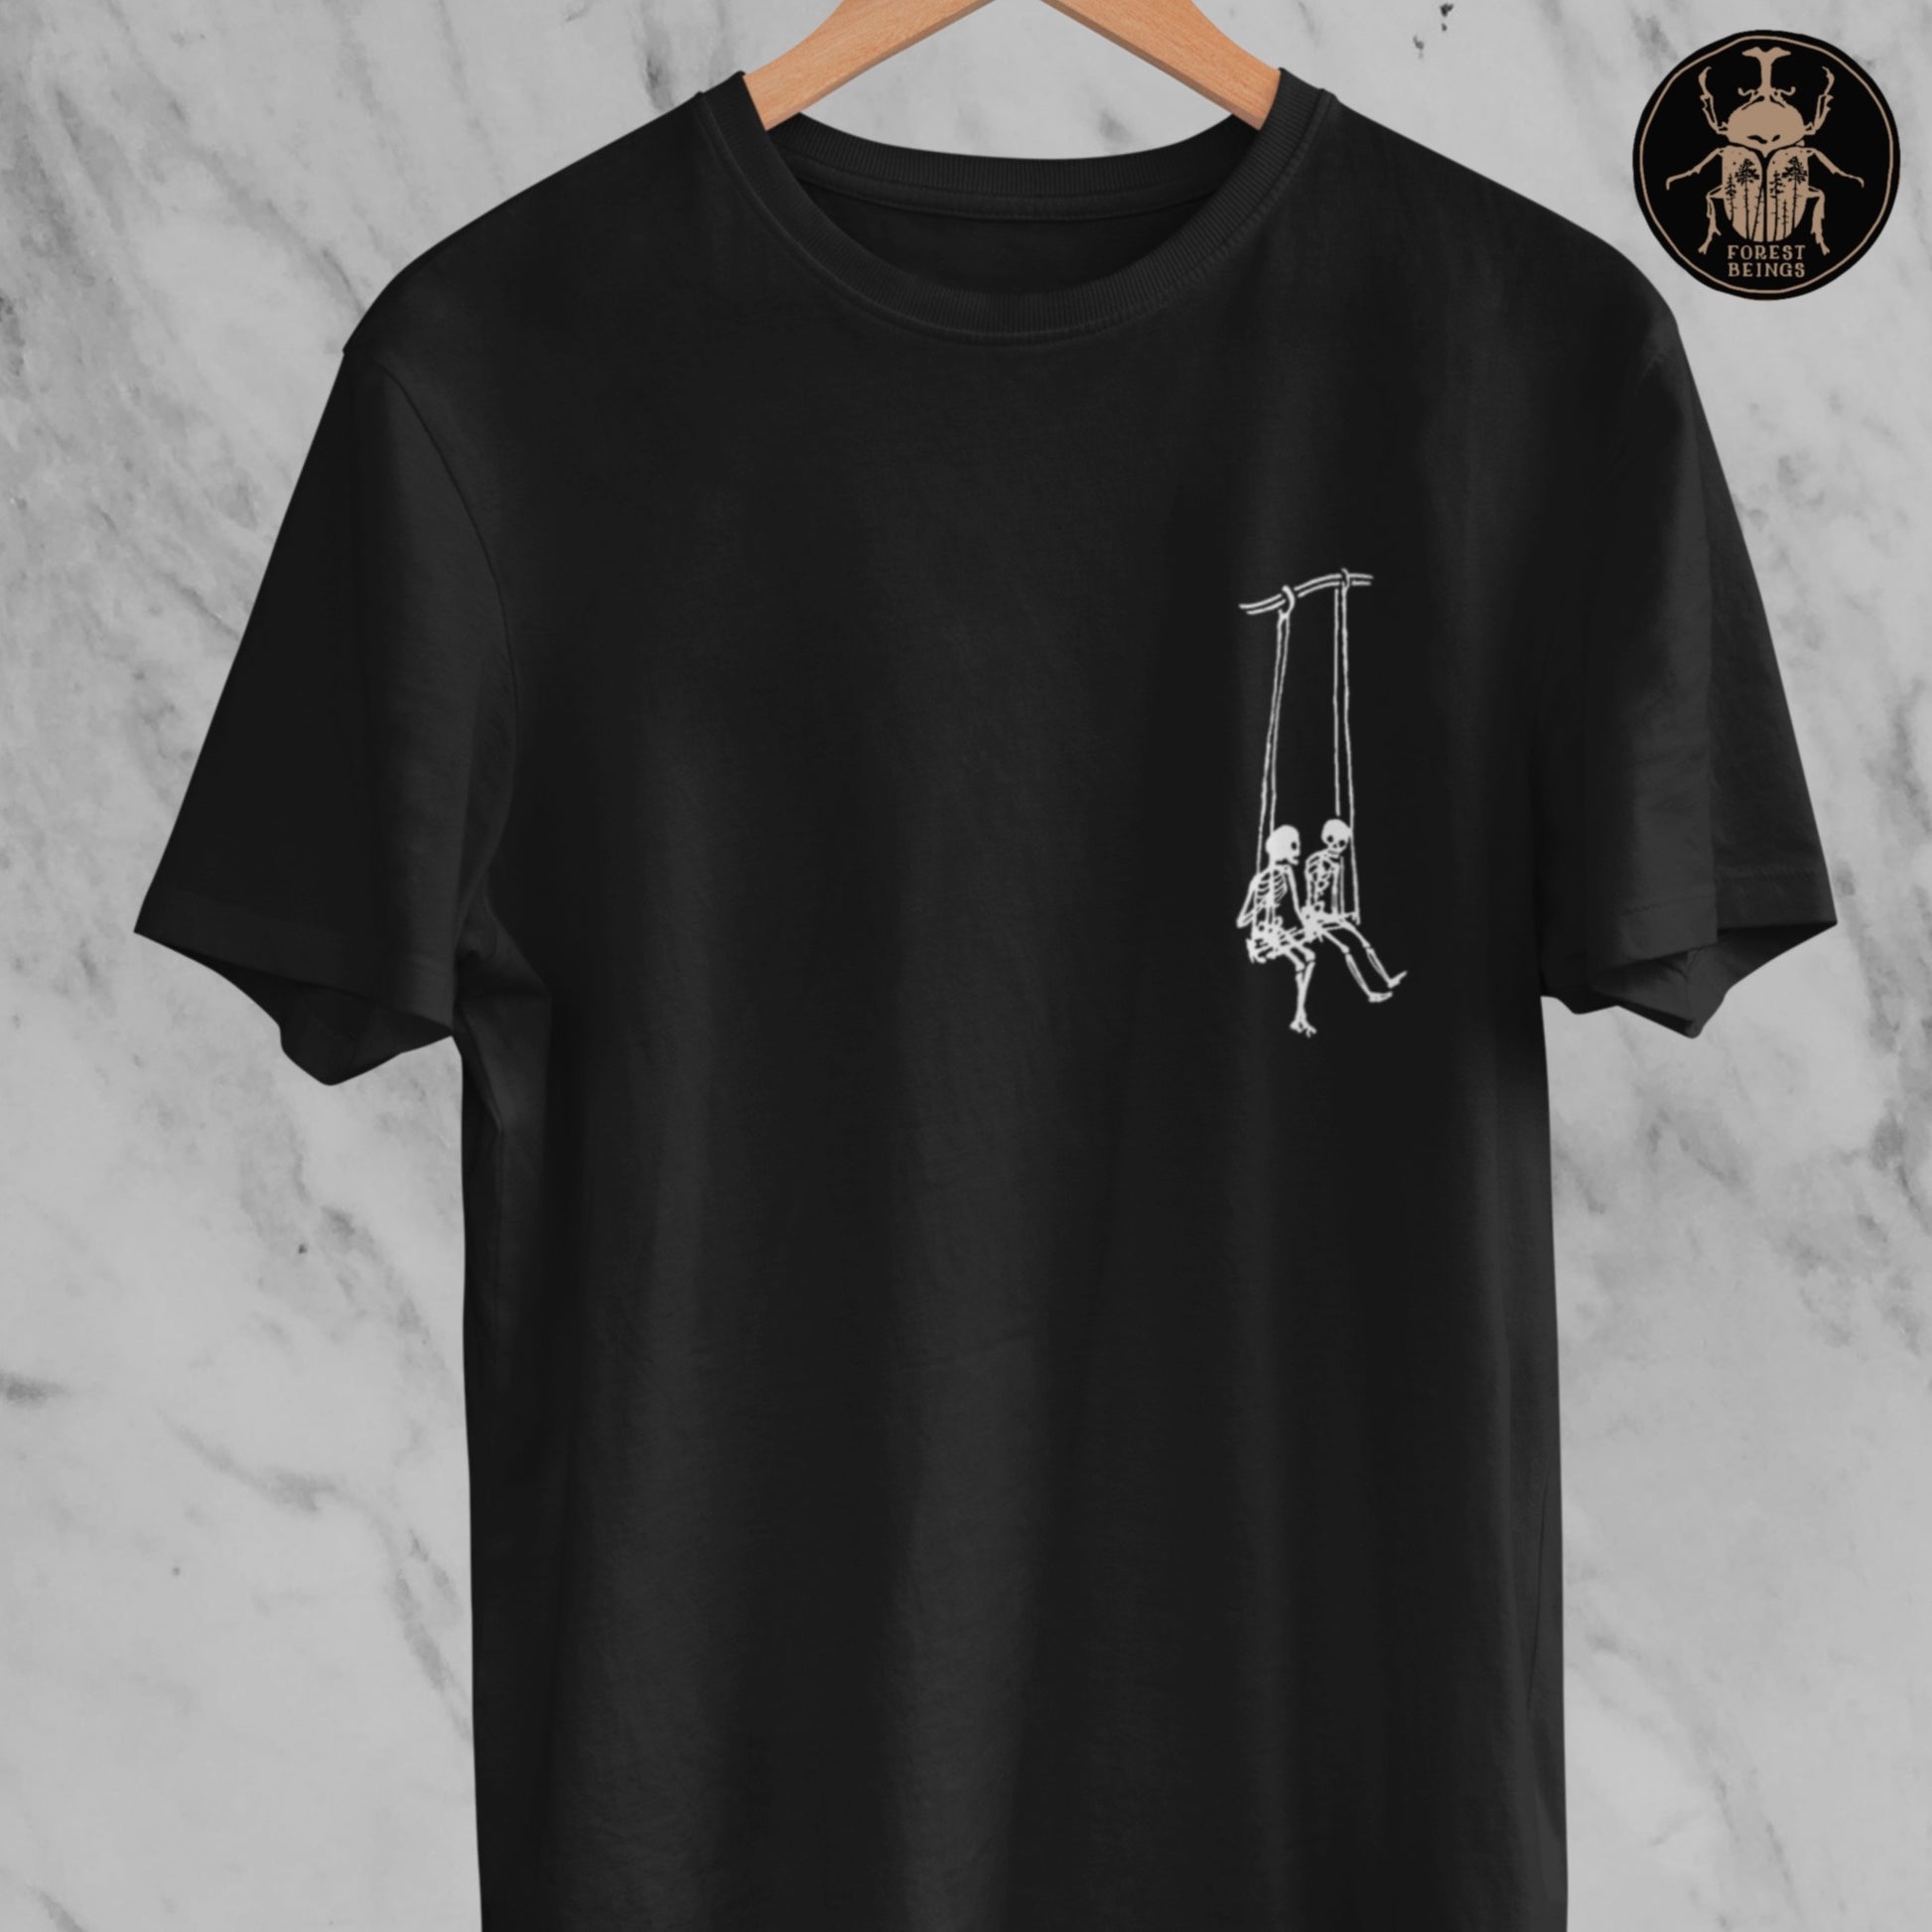 A gothic simple minimalistic t-shirt with two cute skeletons swinging on a swing. 